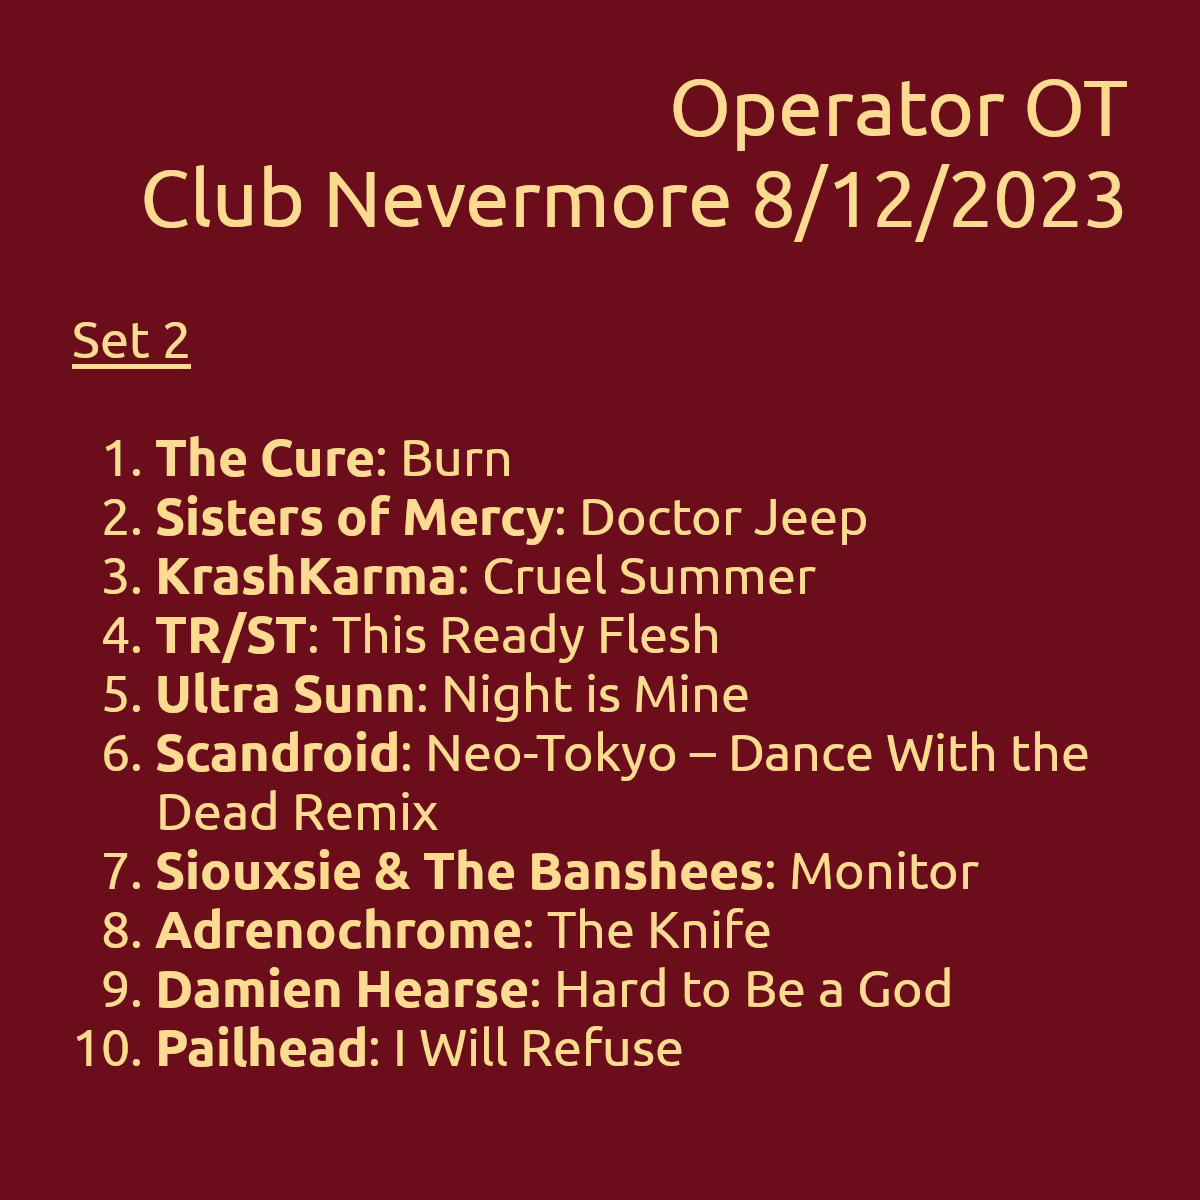 Image made for Instagram with Operator OT&rsquo;s Playlist from his second set at Club Nevermore on August 12, 2023. The list of the tracks he played is in the list below.